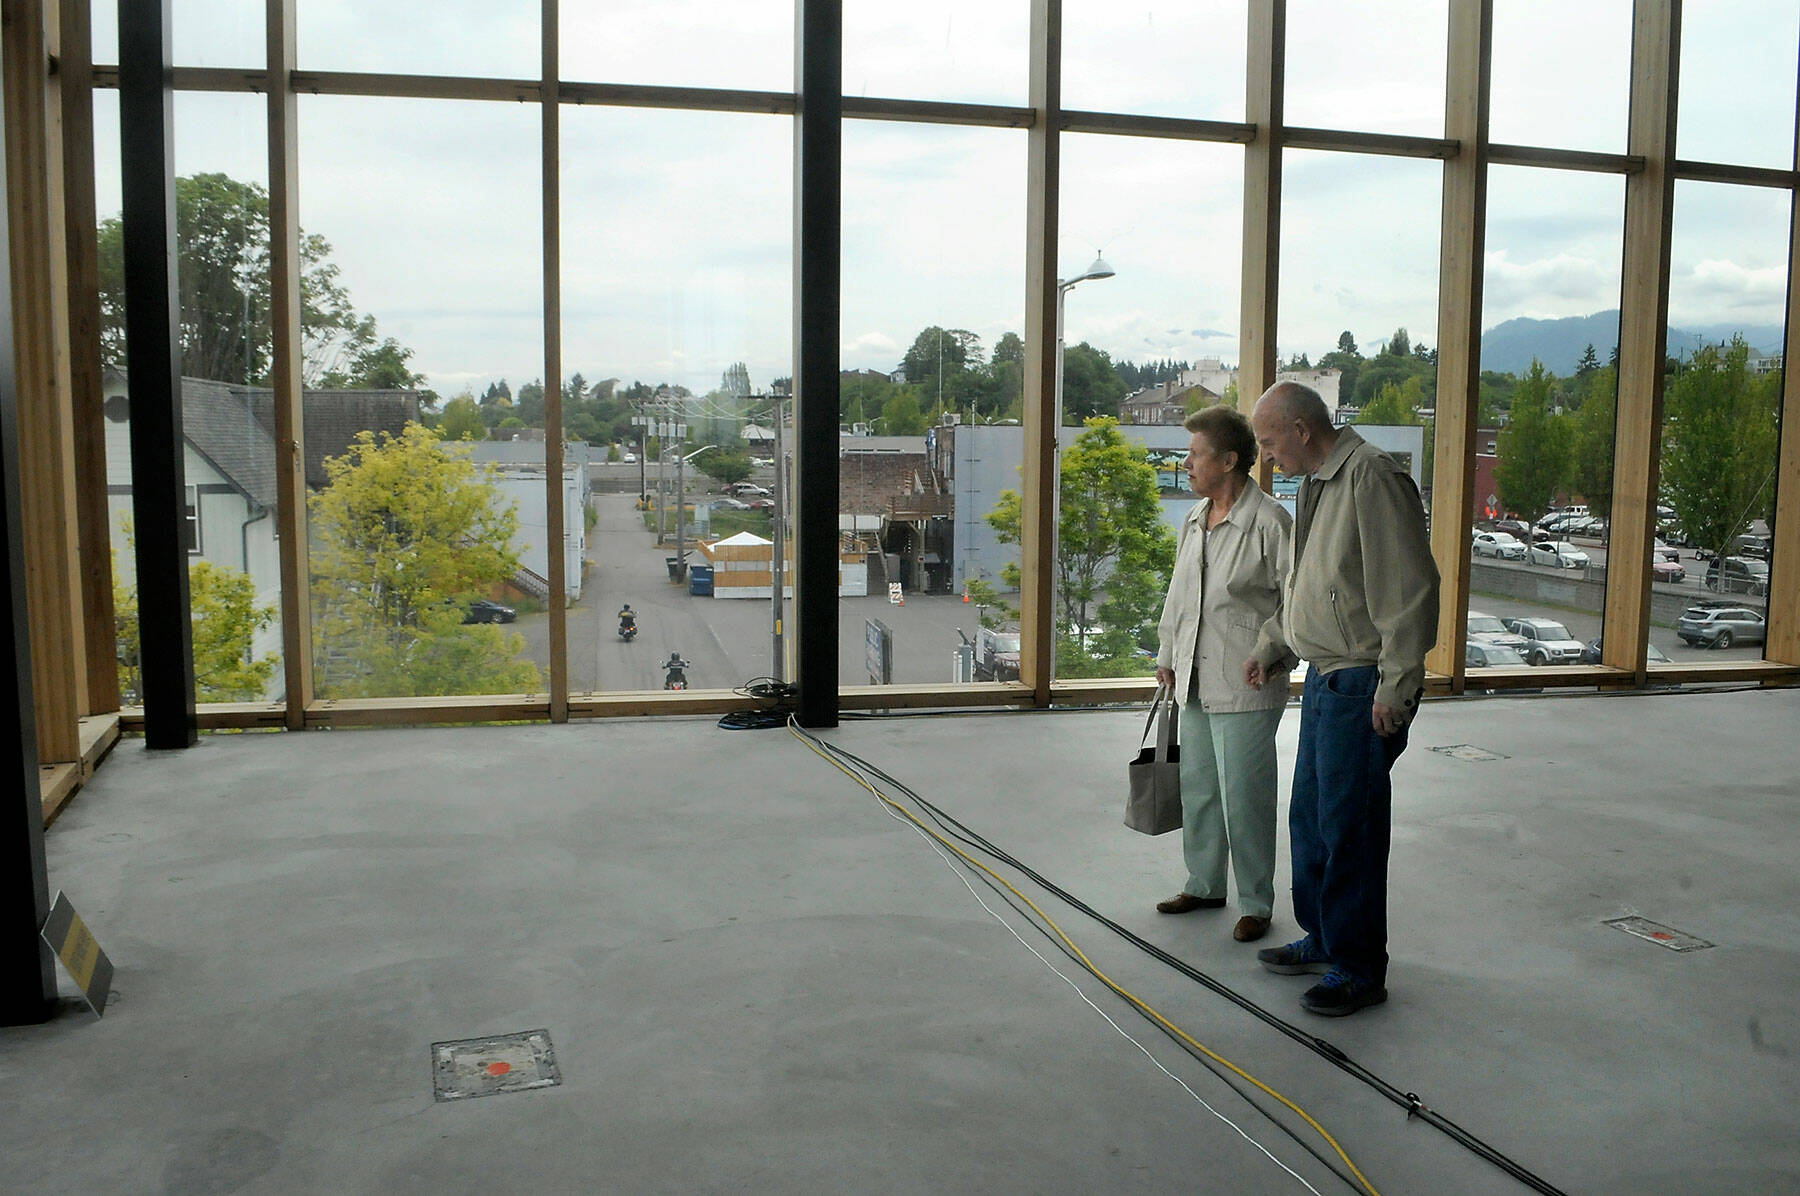 Jan and Ray Morgan of Port Angeles admire the view from the glass-walled conference center during an open house at the Field Hall Arts & Events Hall on Thursday in Port Angeles. (Keith Thorpe/Peninsula Daily News)